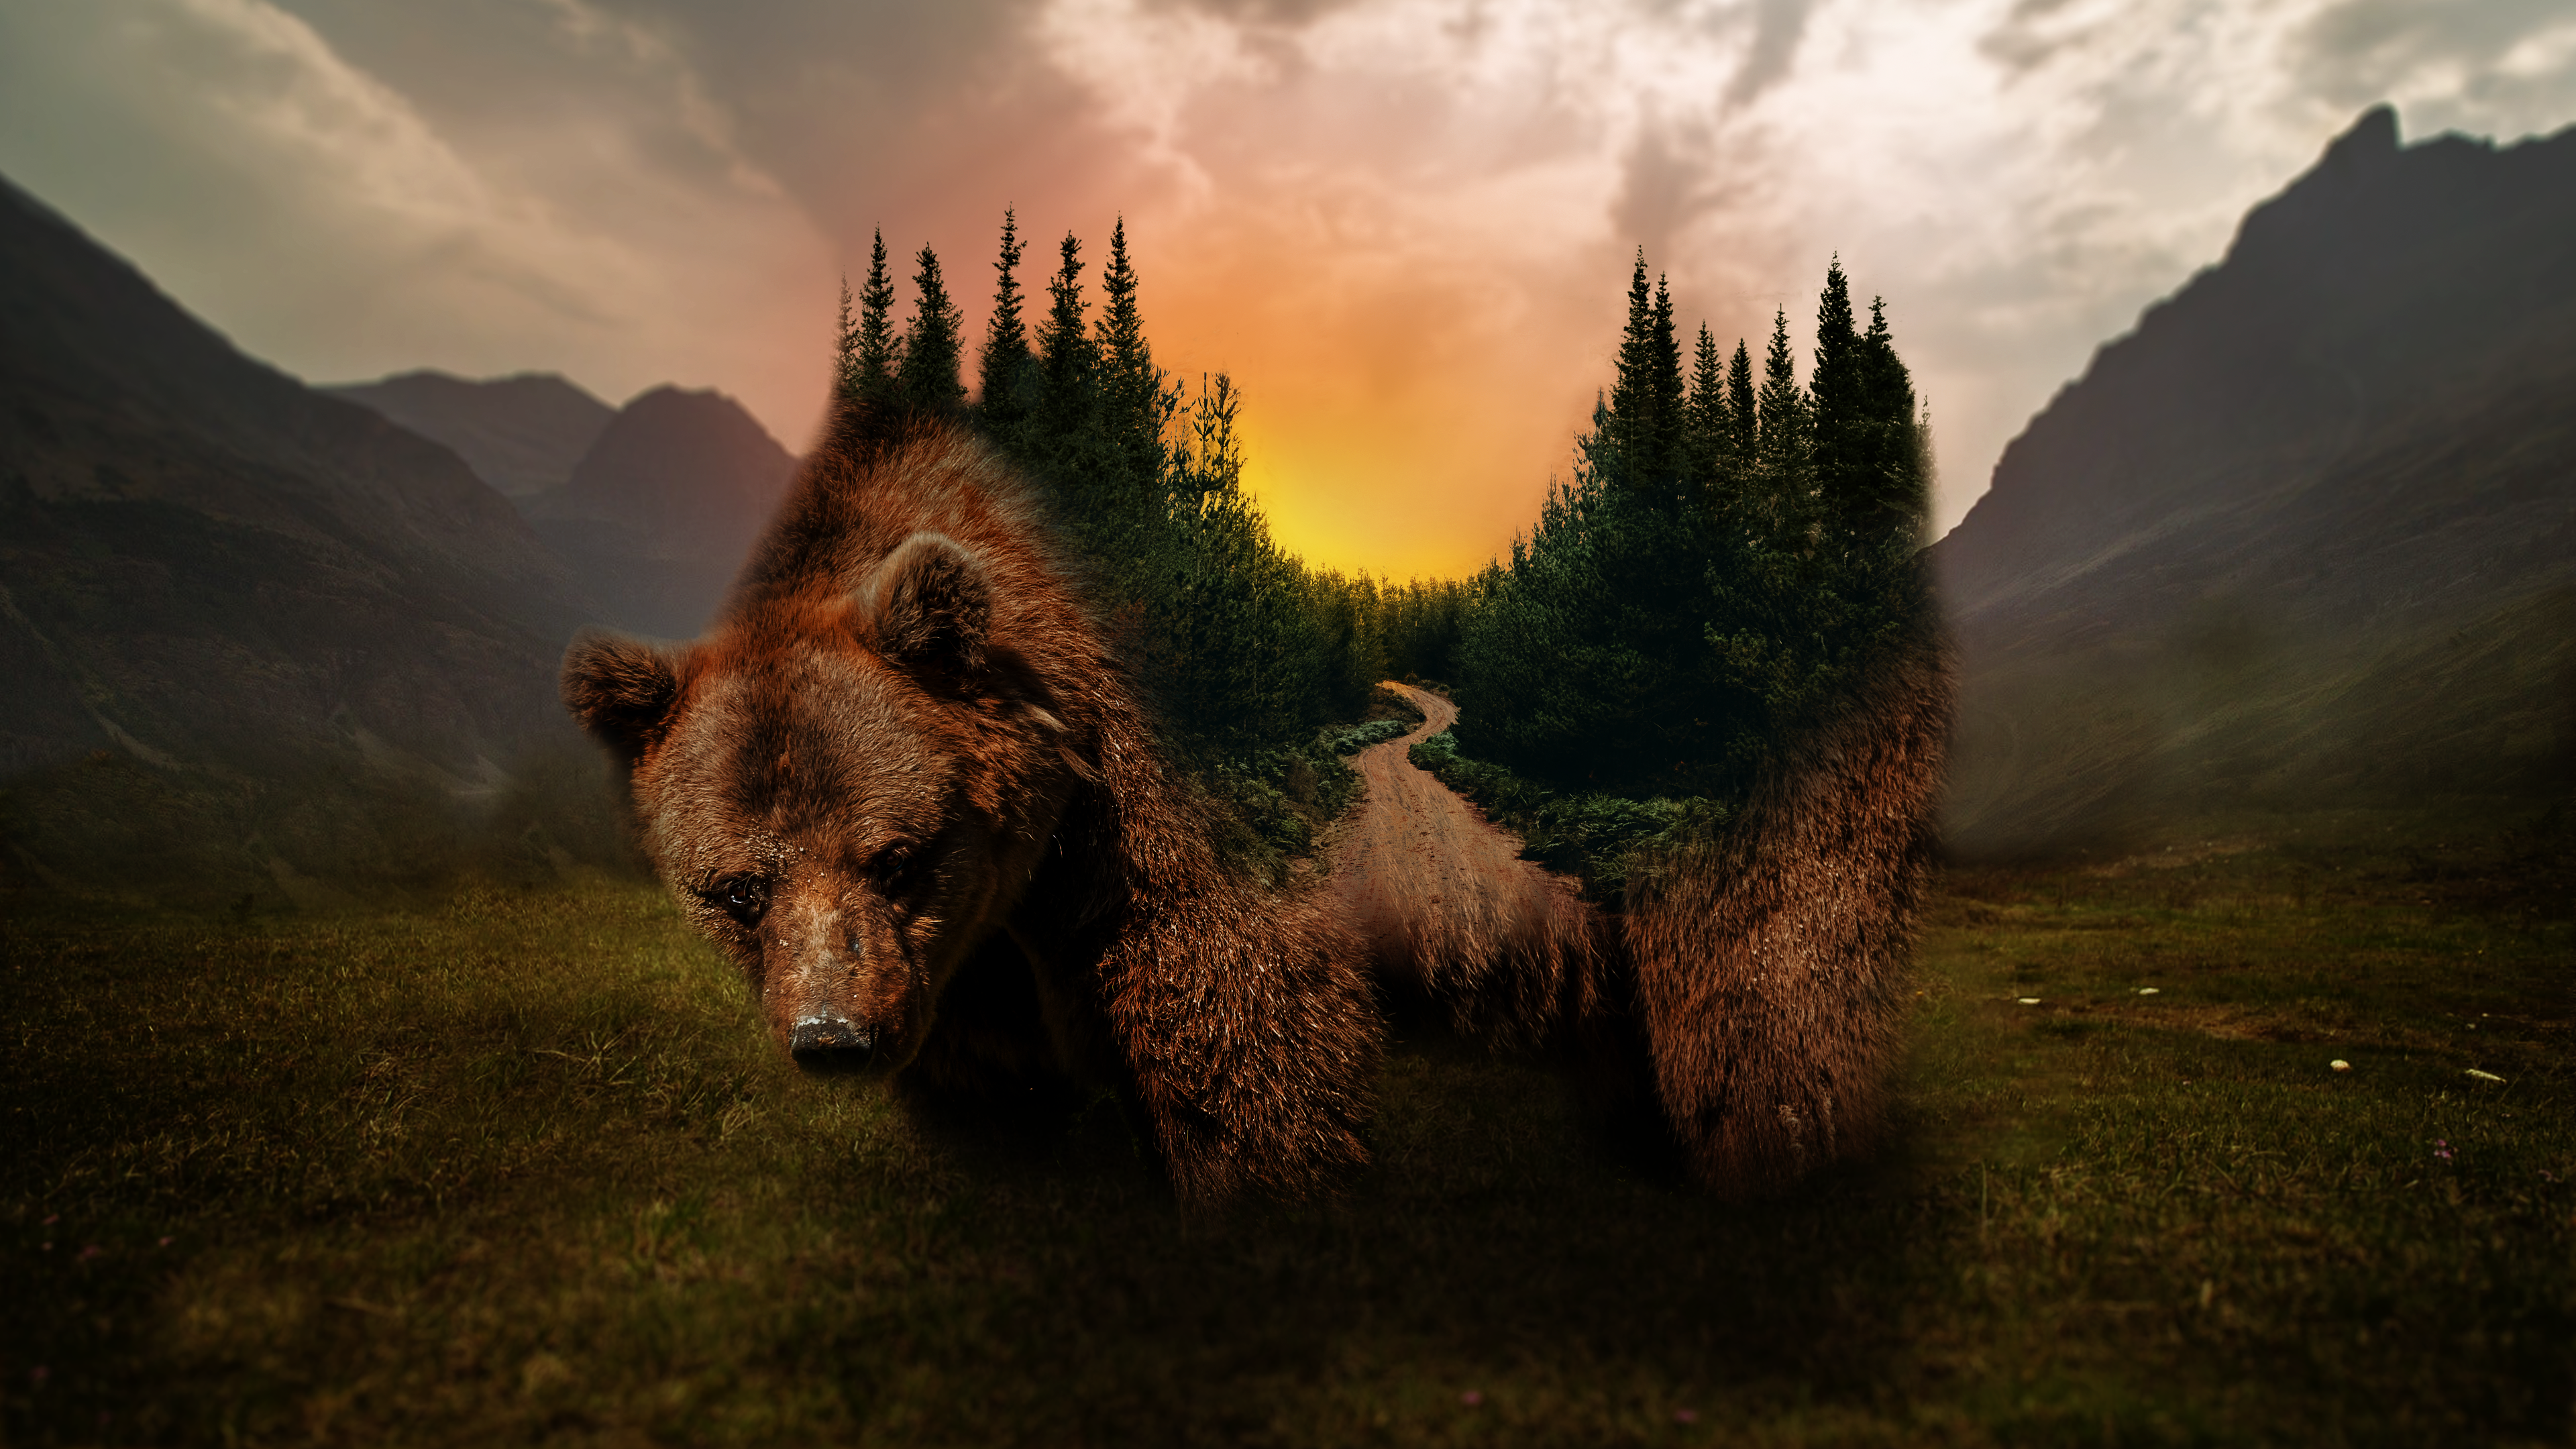 Grizzly Bear Forest Sunset Nature Digital Art 3840x2160